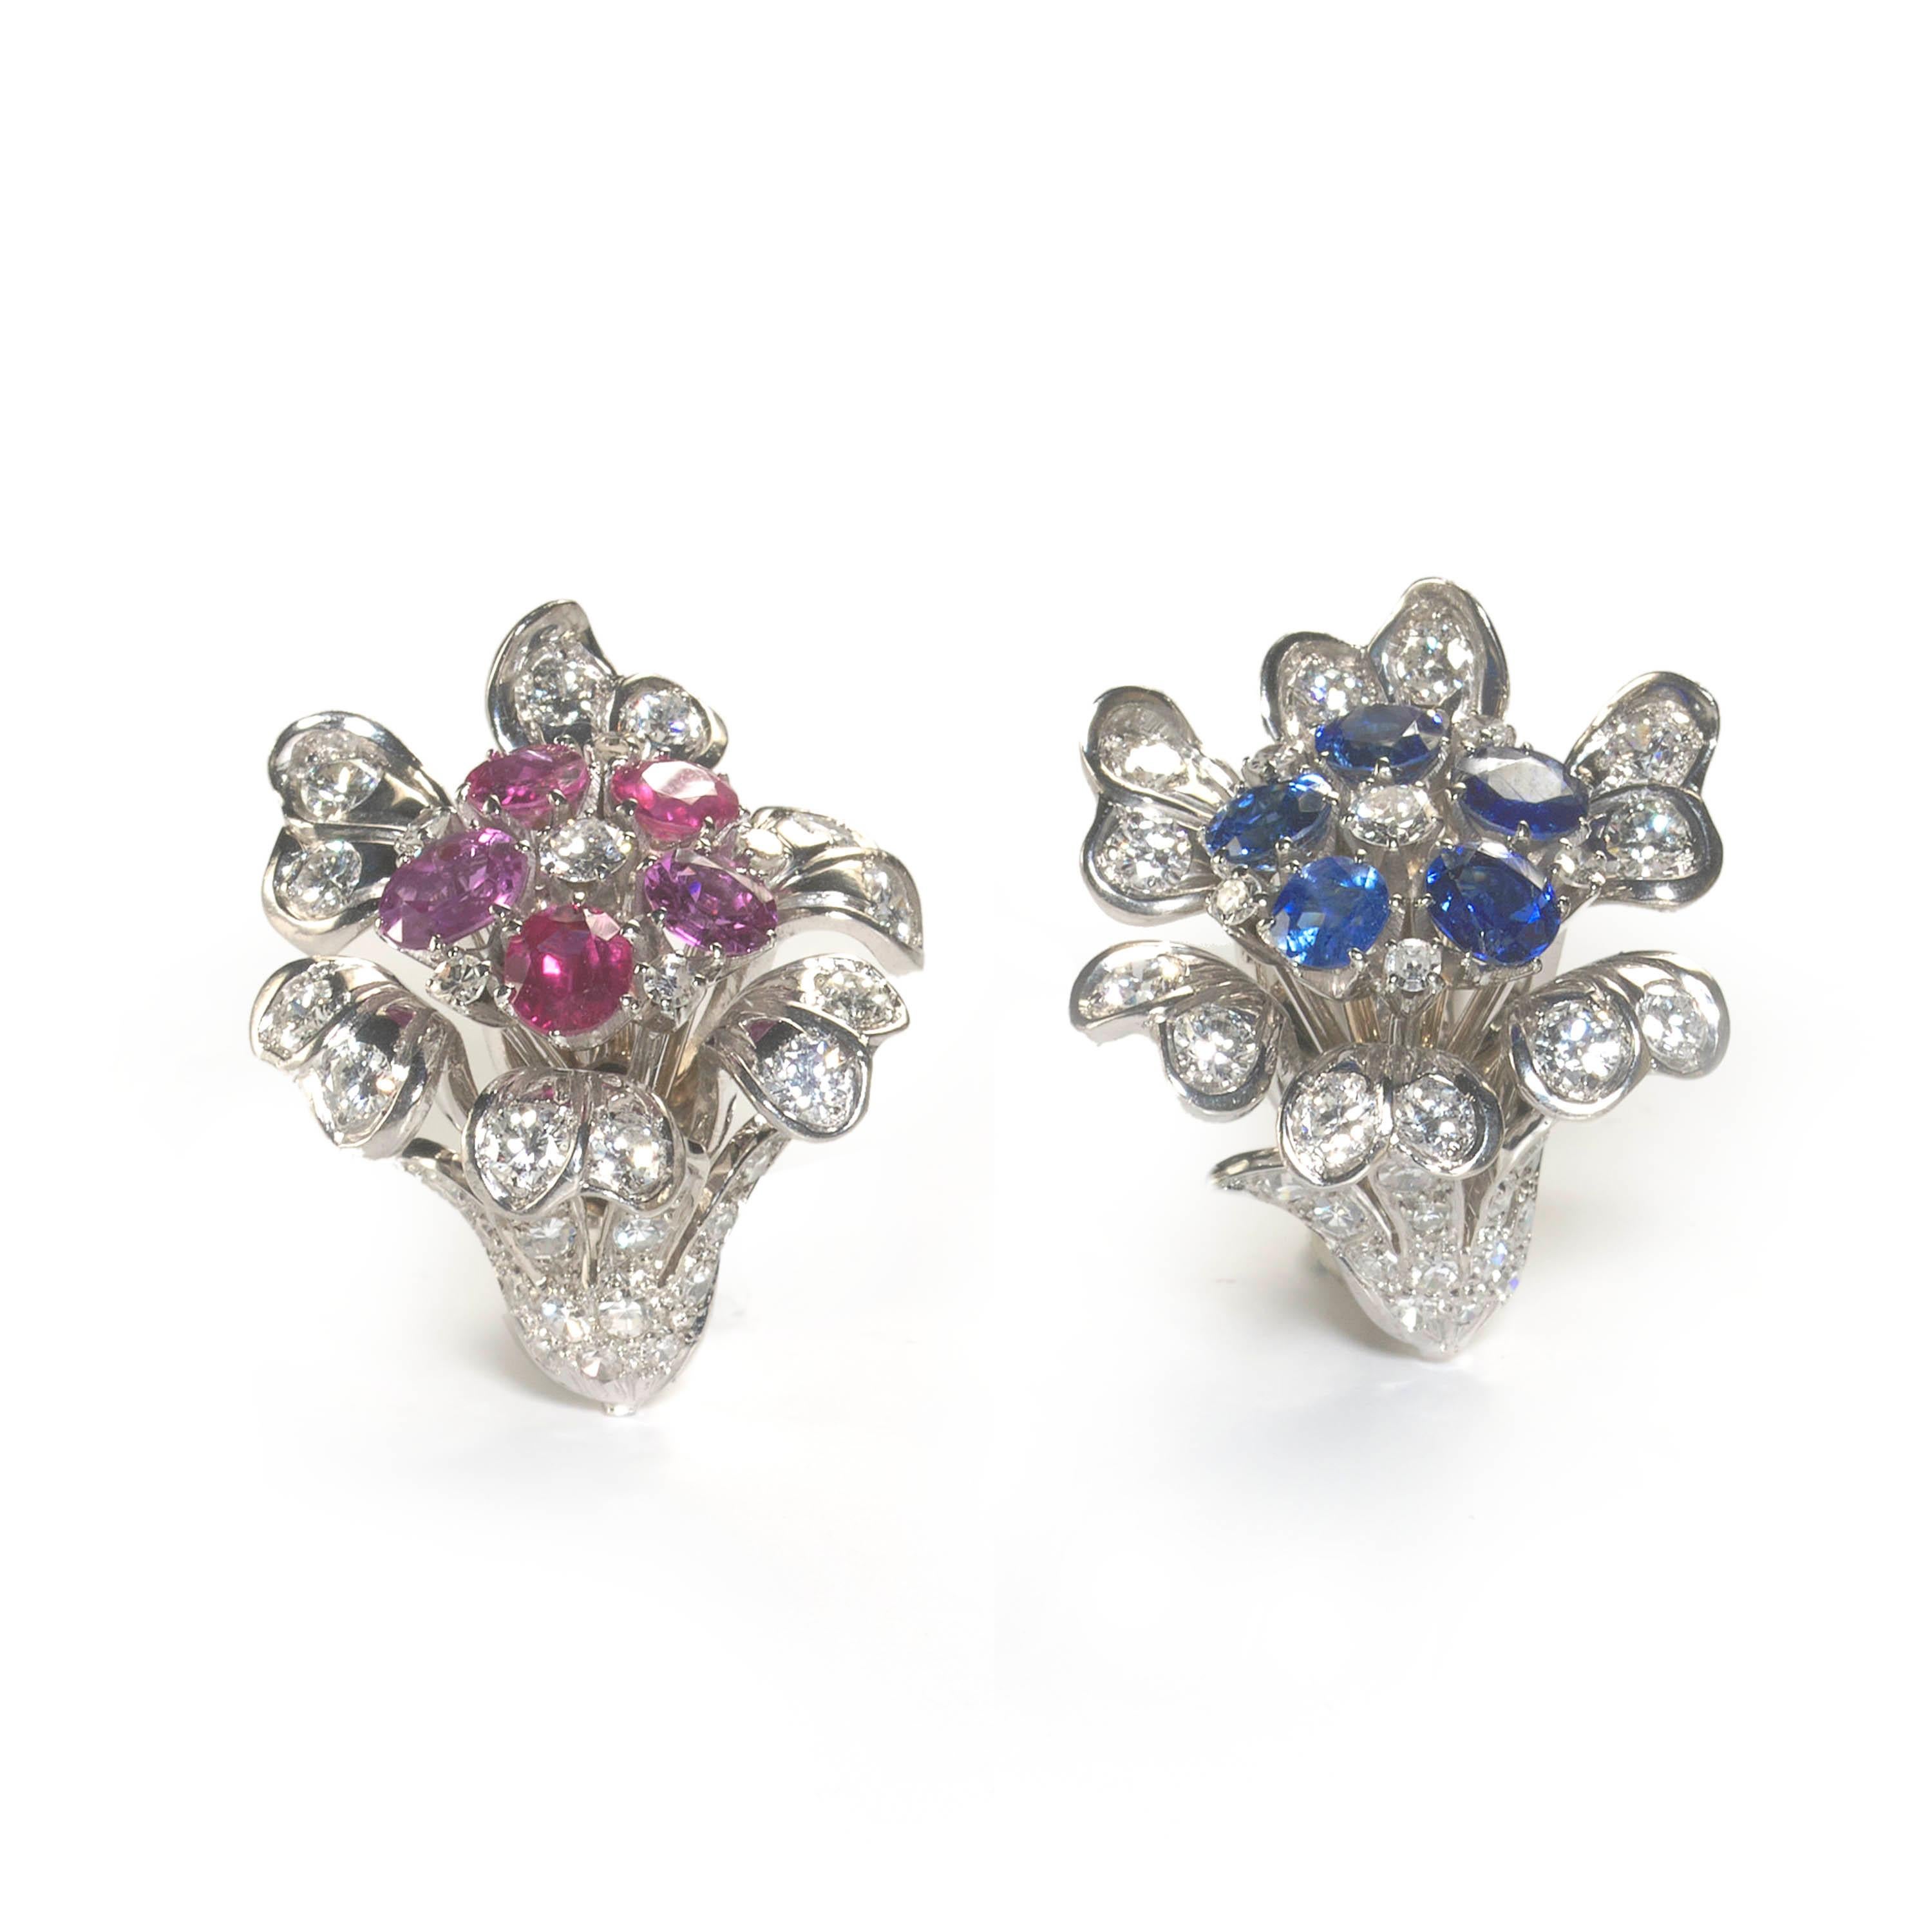 A pair of vintage ruby, sapphire and diamond set cornucopia flower cluster earrings, with stylised cornucopia shaped flower heads, with round brilliant-cut diamonds set in the petals and eight-cut diamonds set in the calyx. The centre of one earring